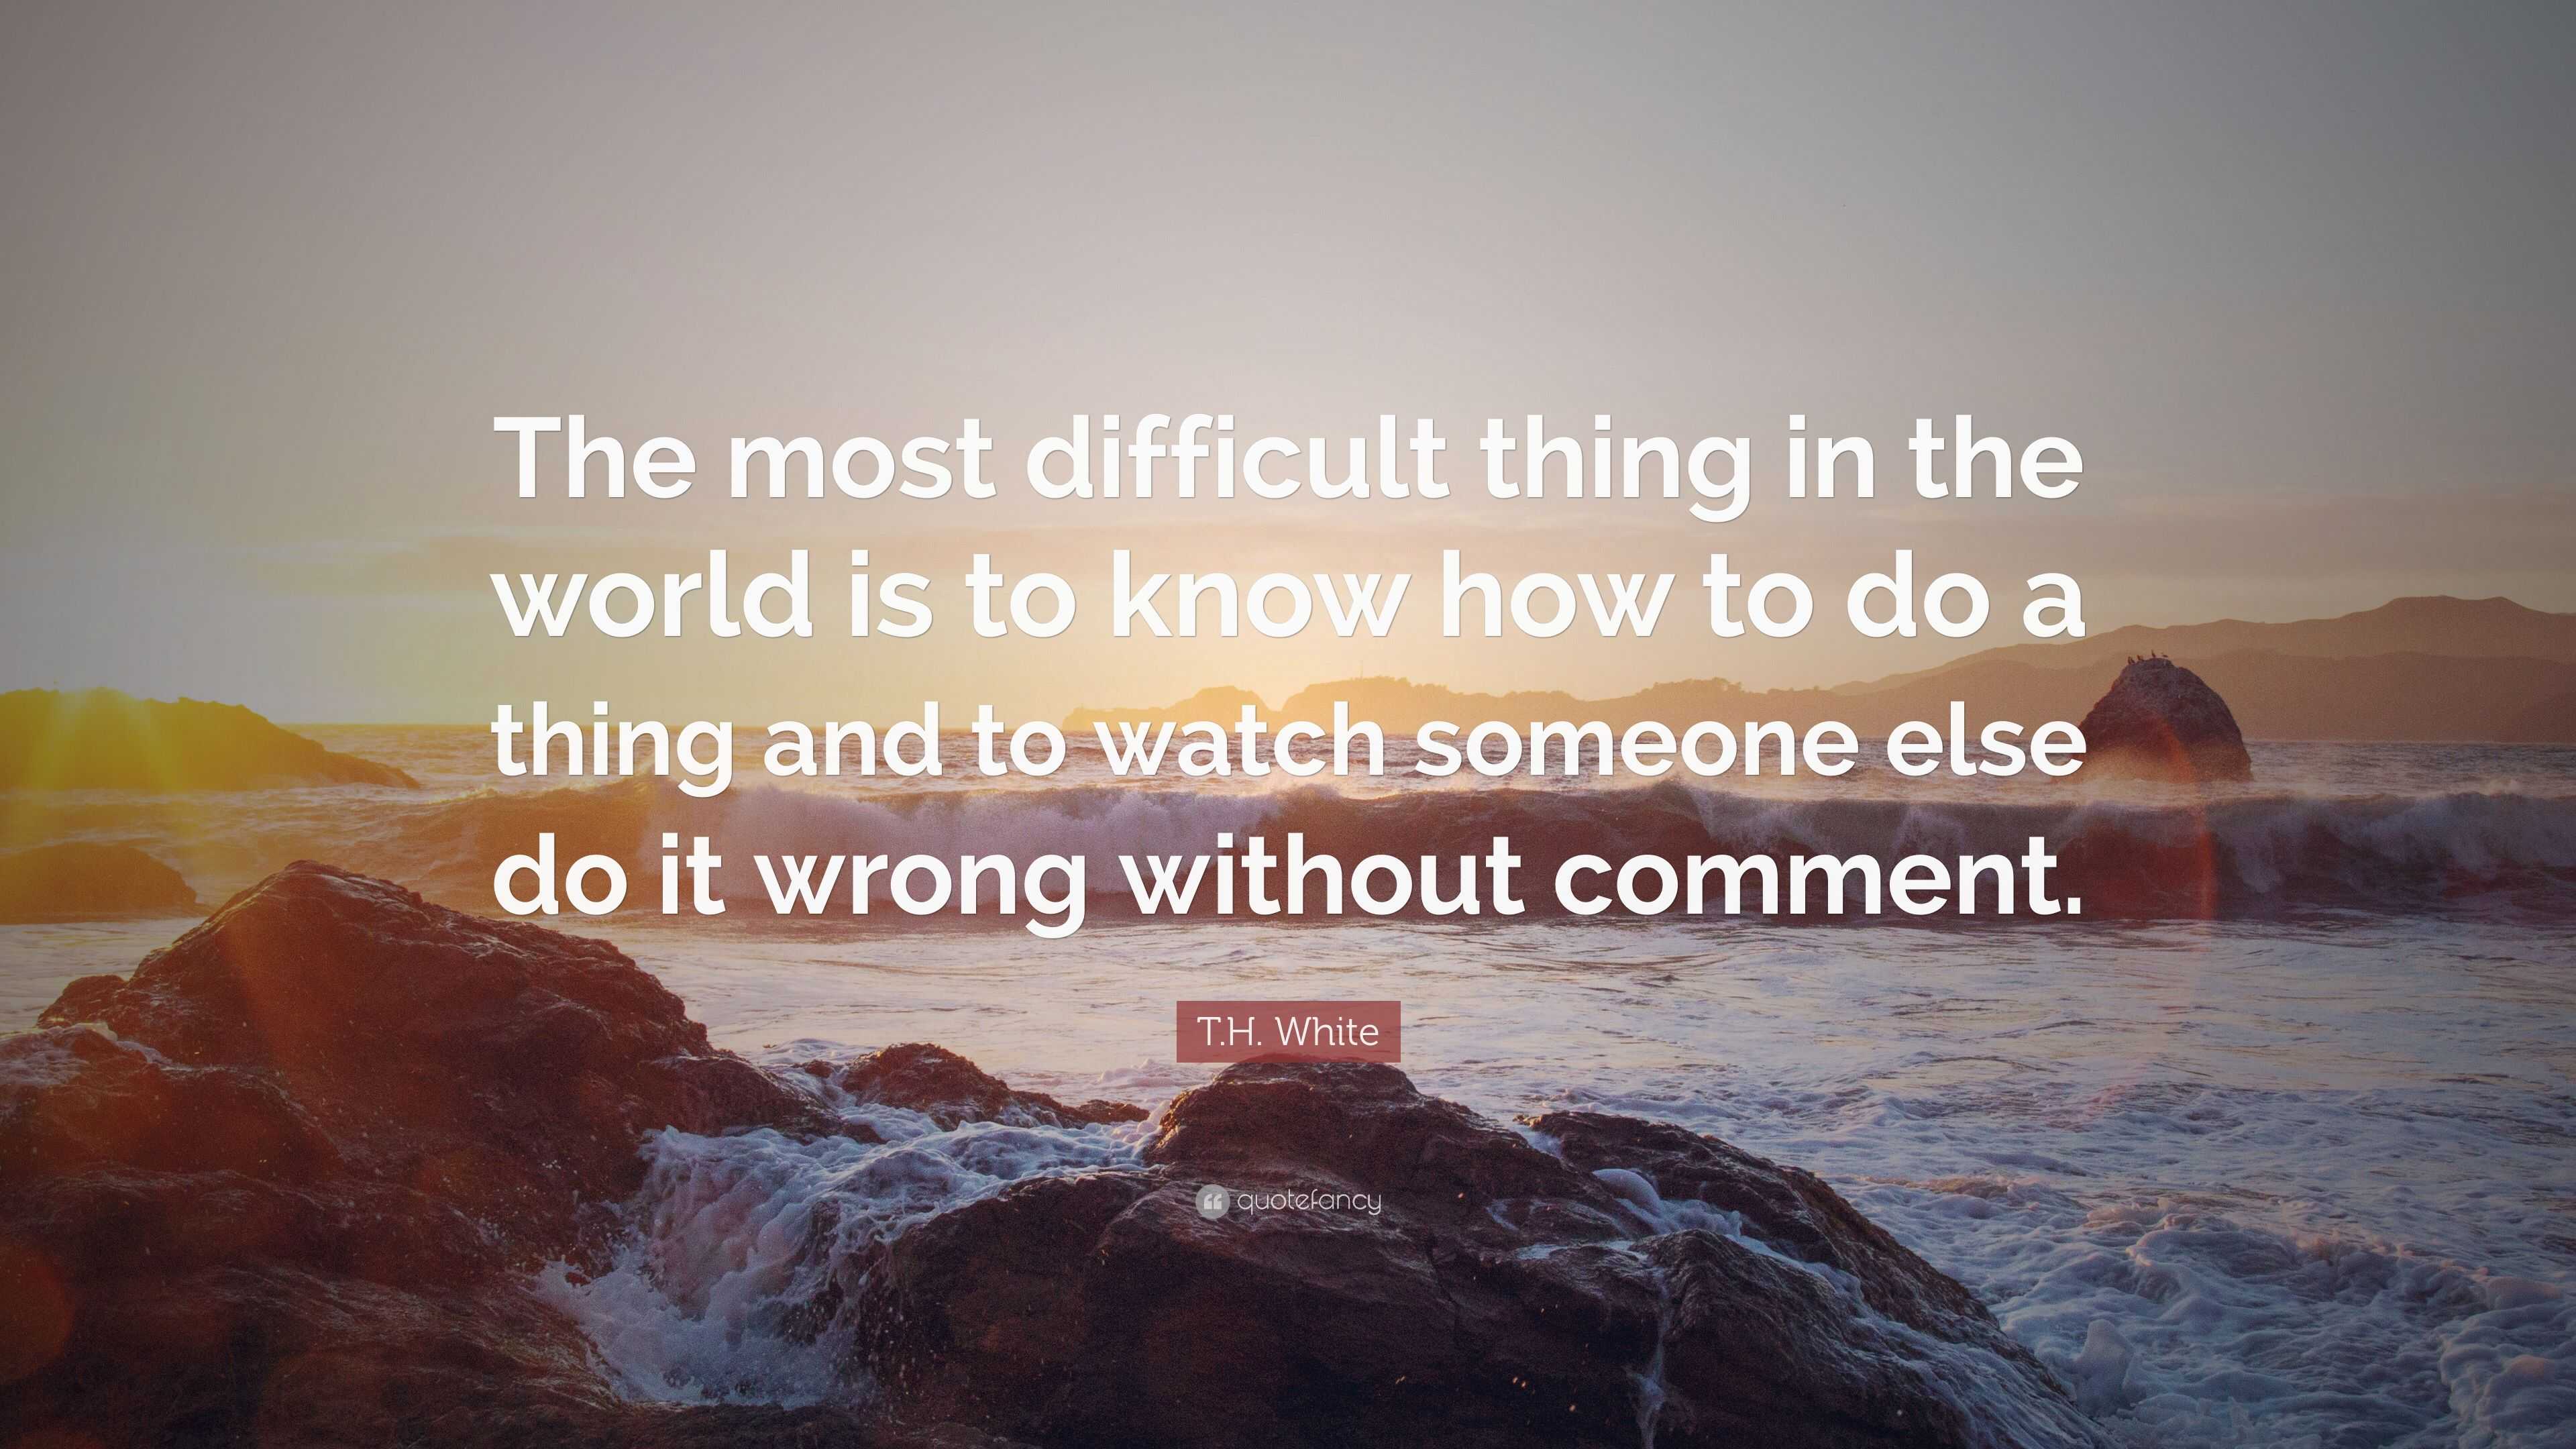 T.H. White Quote: “The most difficult thing in the world is to know how ...